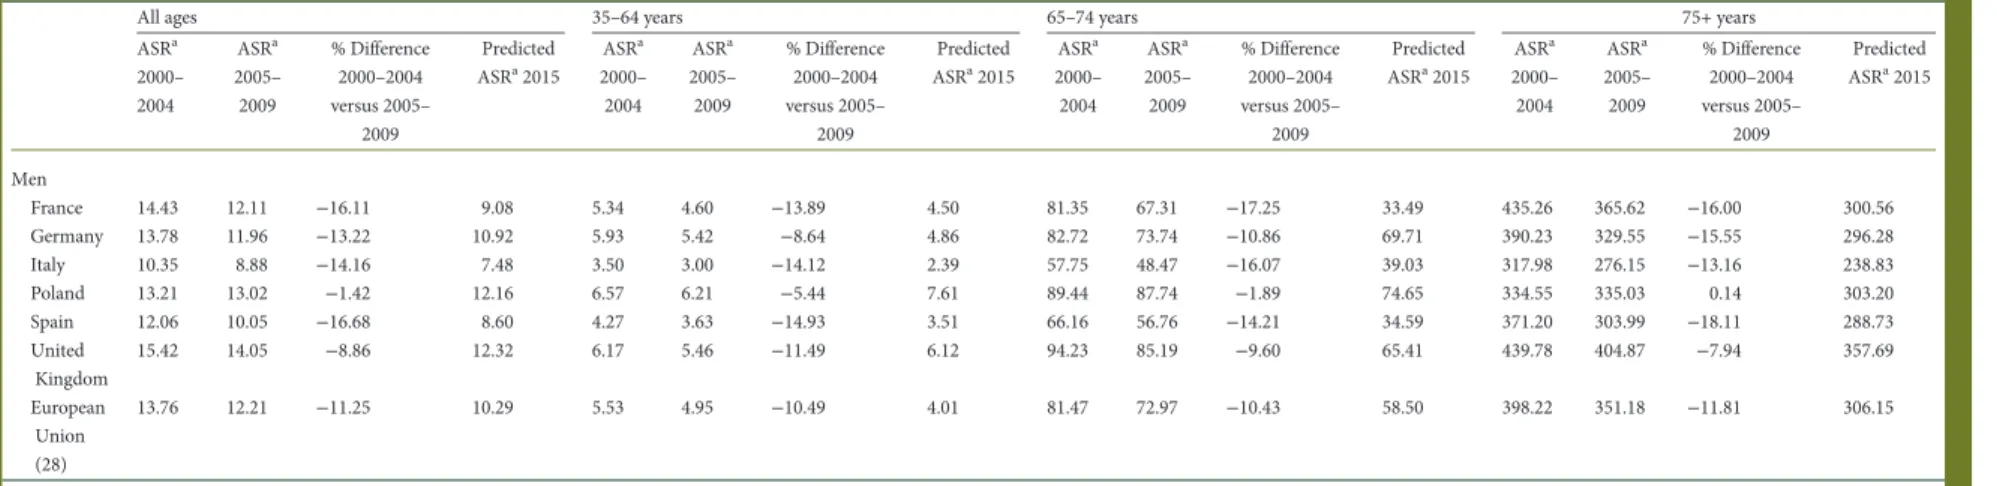 Table 2. Age-standardised prostate cancer mortality rates for all ages, 35–64, 65–74 and 75+ years in the quinquennia 2000–2004 and 2005–2009 with percentage differences and predicted total rates in the EU and selected countries